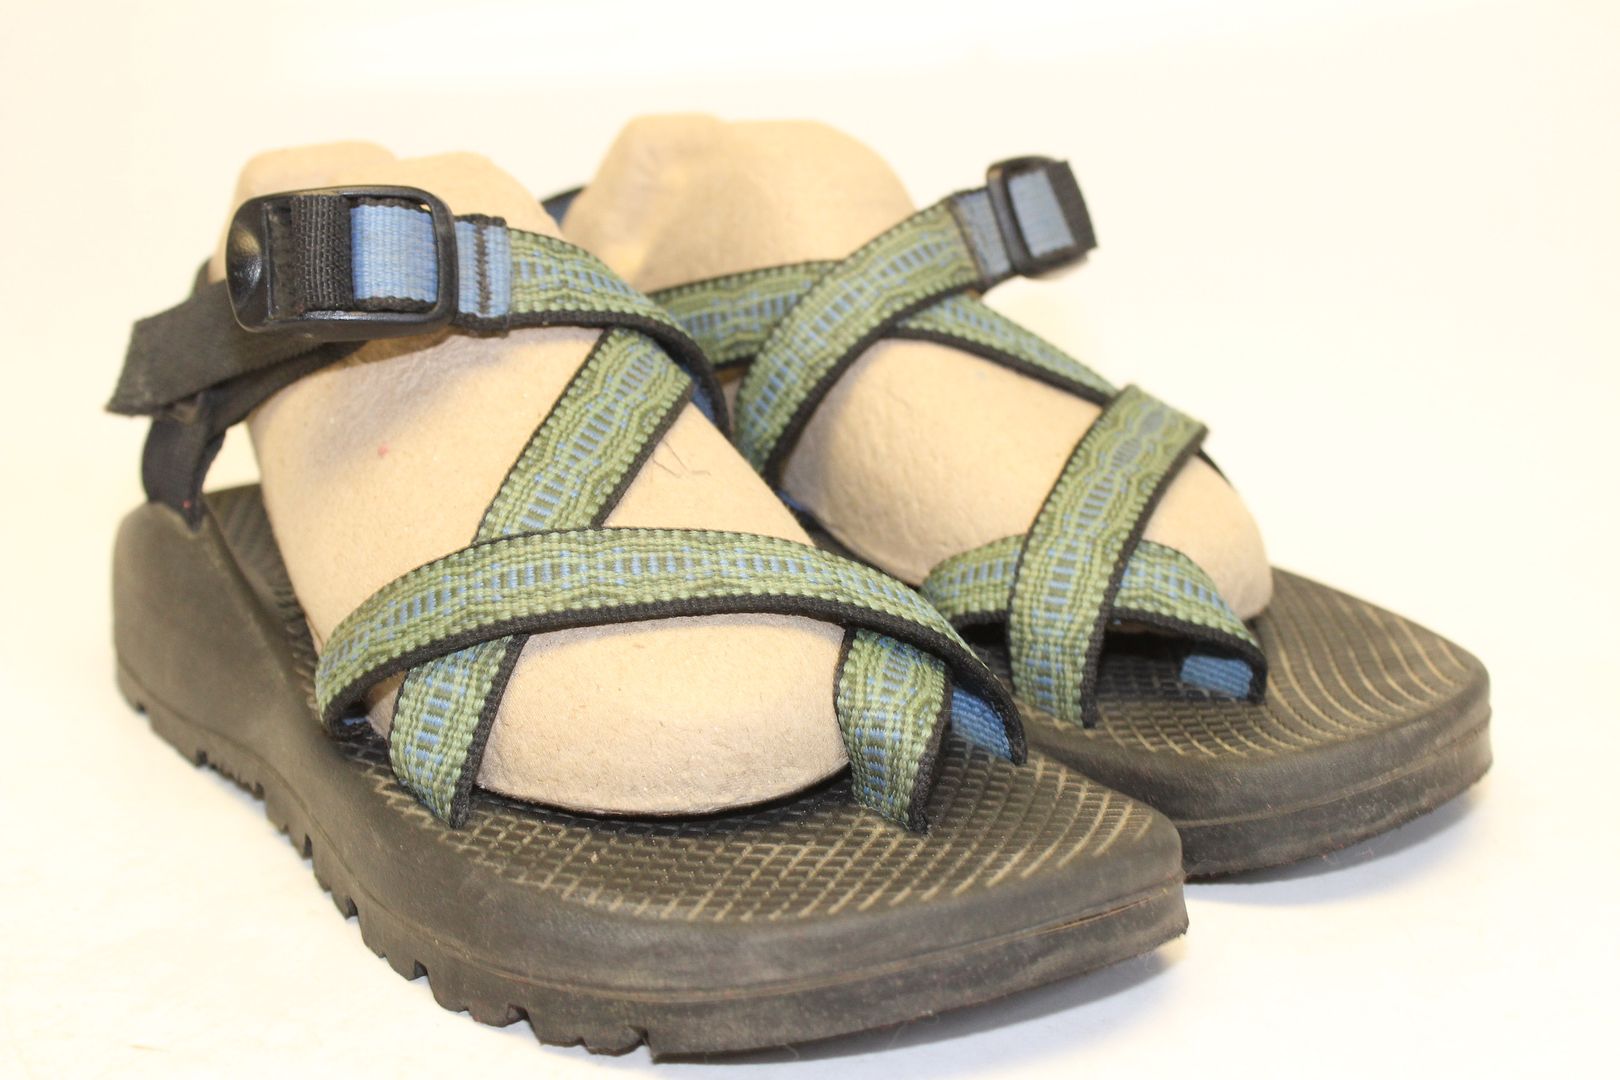 Chaco USA Made Womens 8 Green Blue Printed Canvas Hiking Sandals Shoes